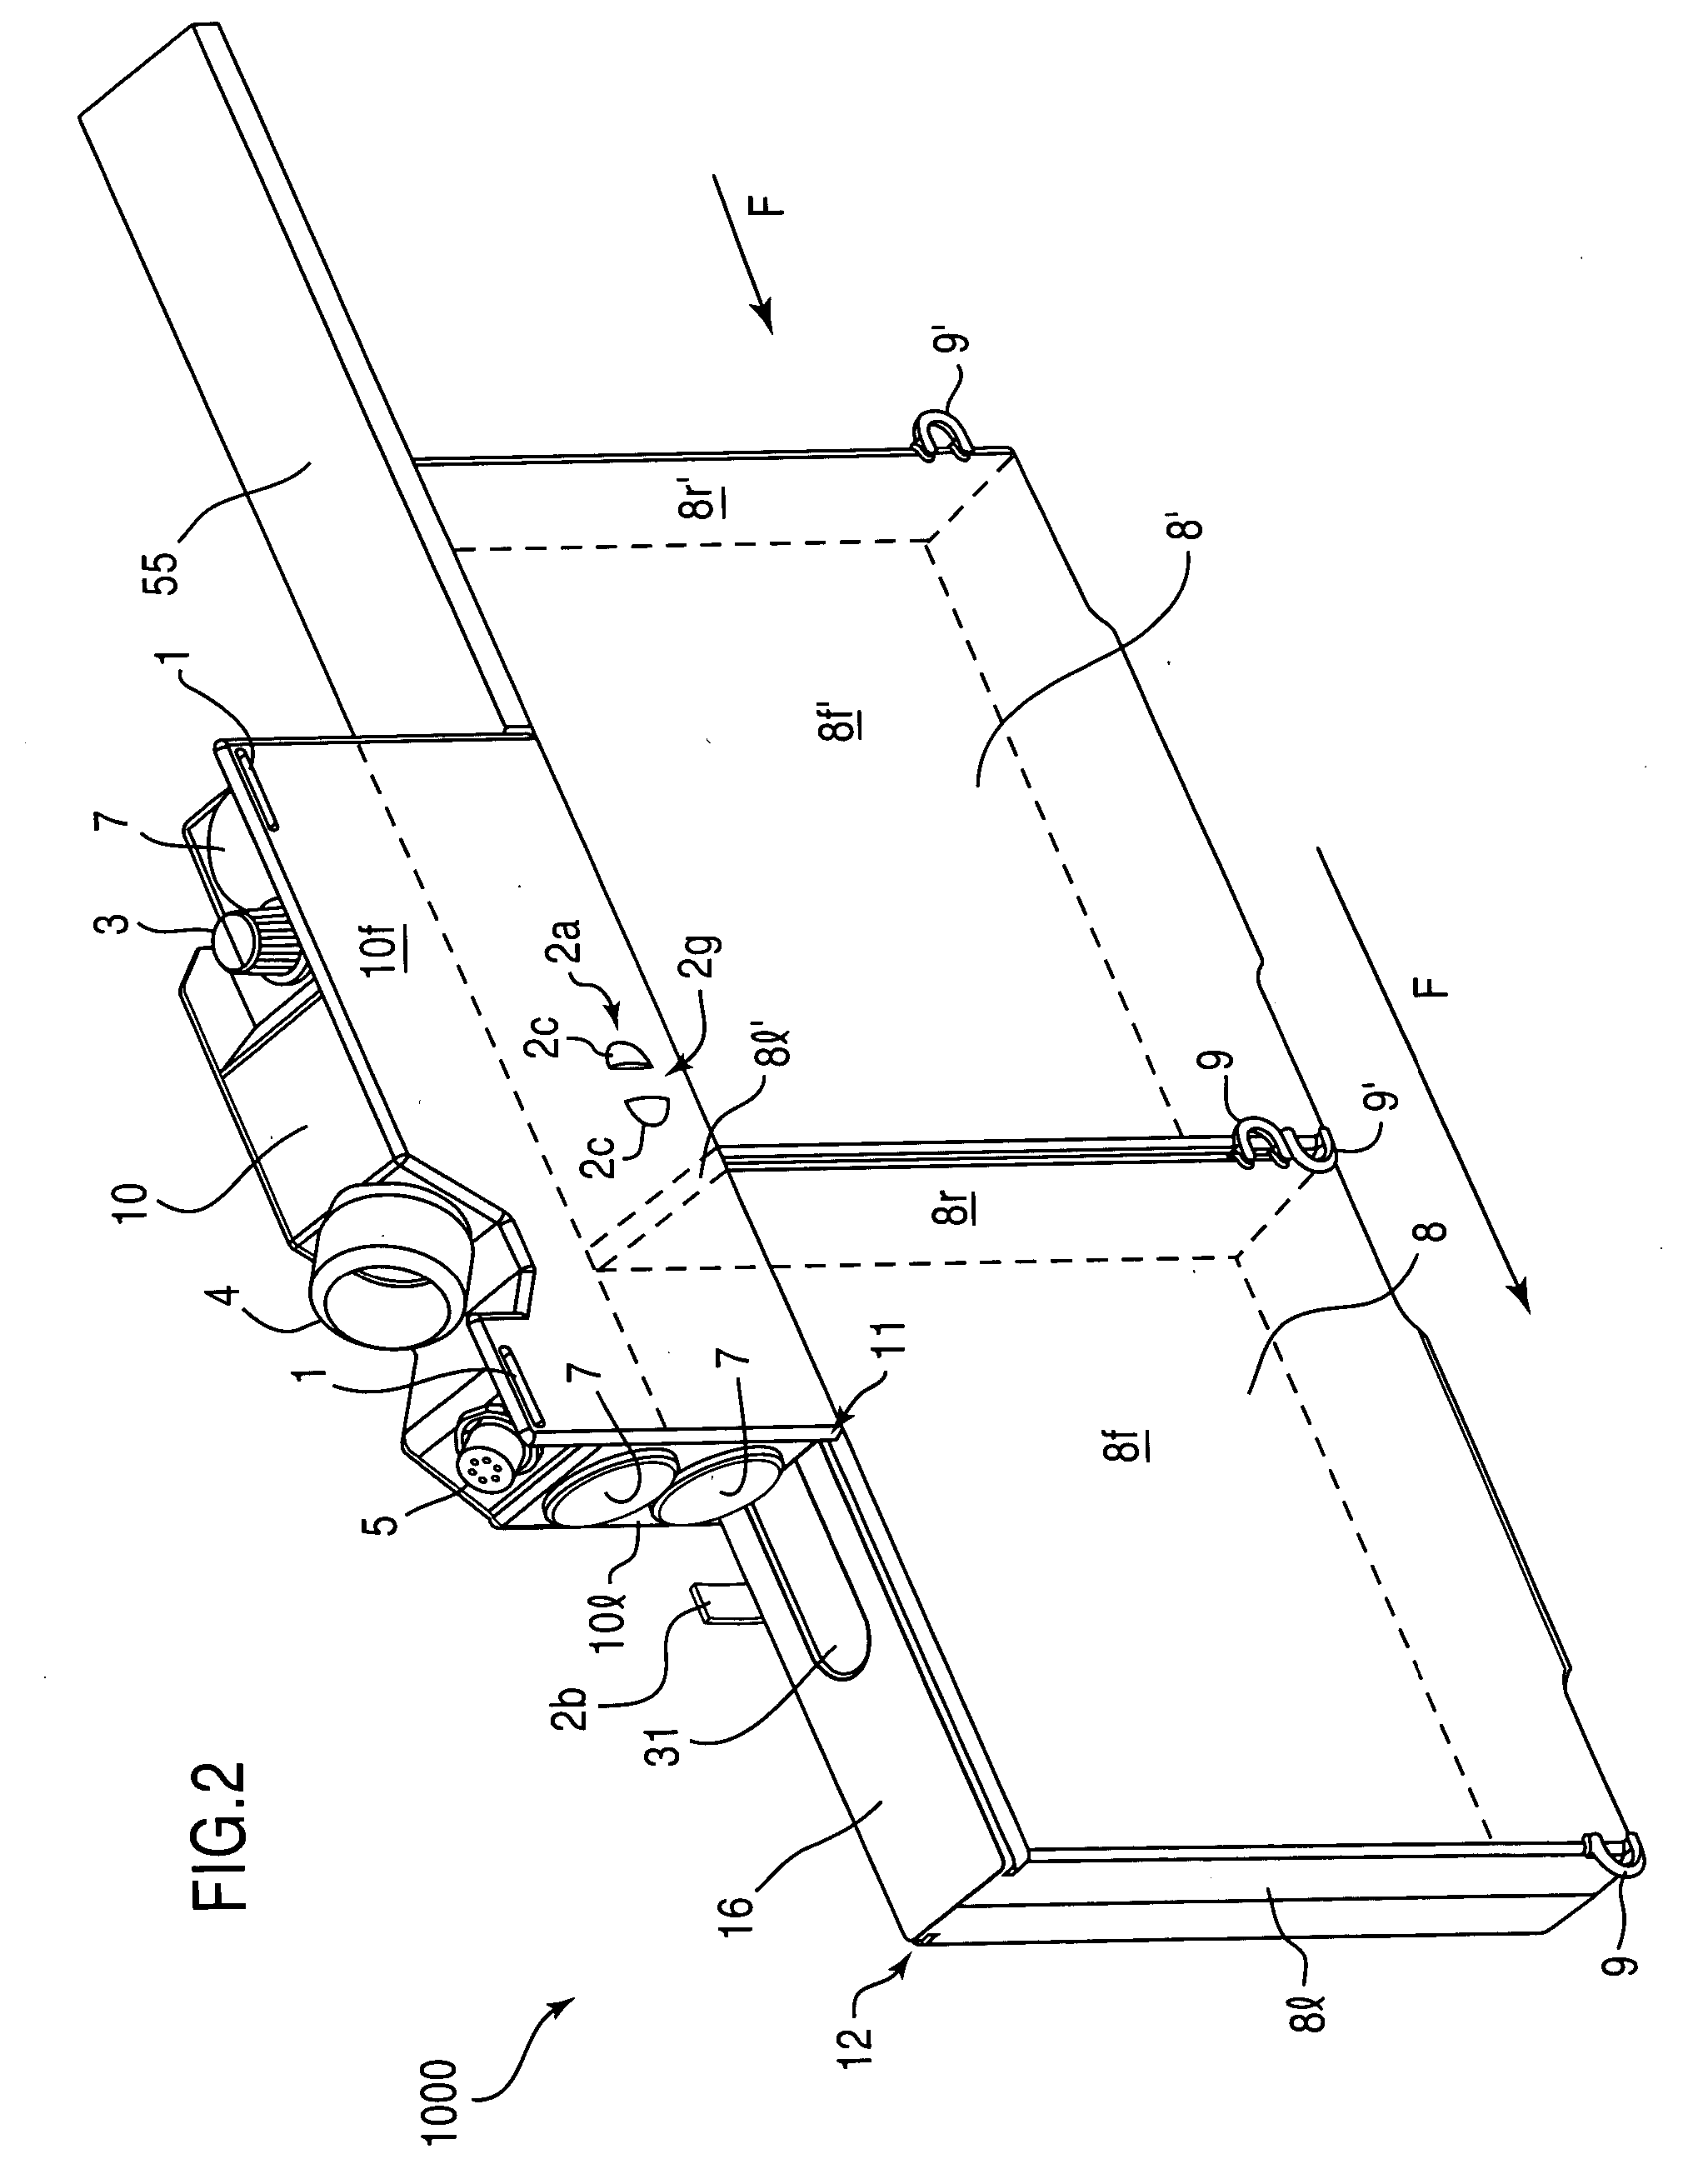 Thin profile air purifying blower unit and filter cartridges, and method of use